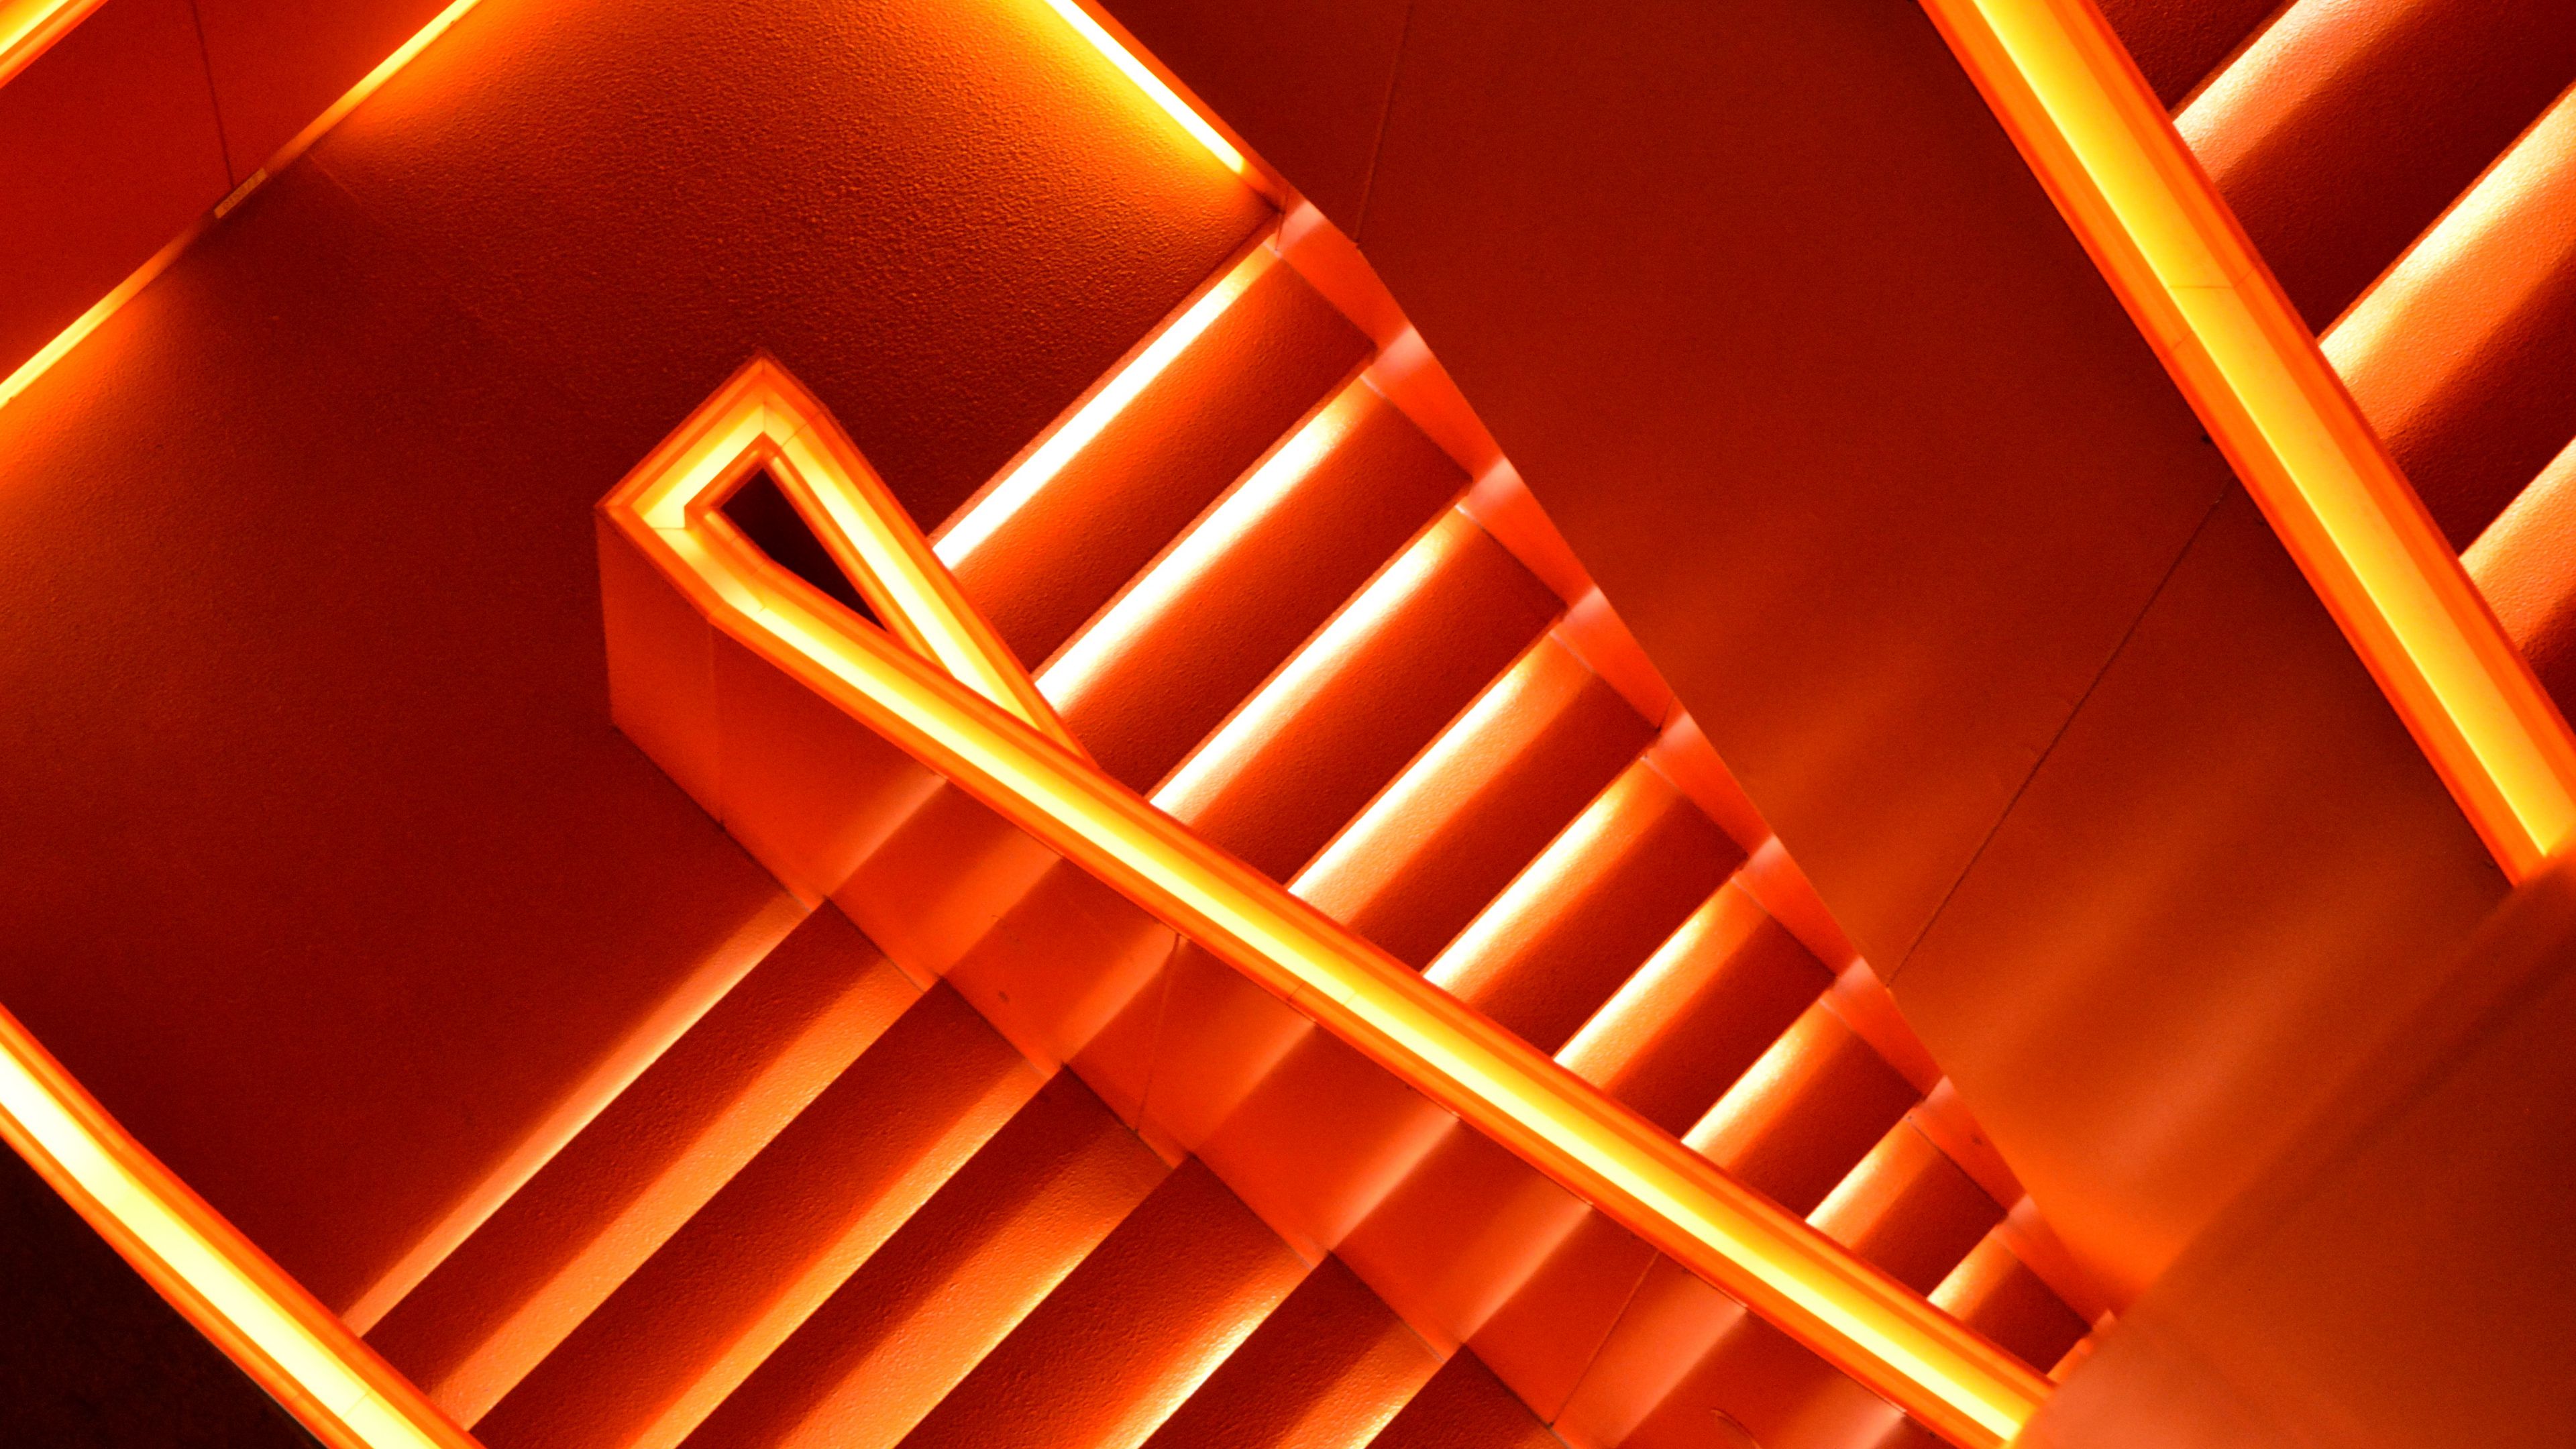 Wallpaper / stairs, neon, backlight, glow, architecture, 4k free download